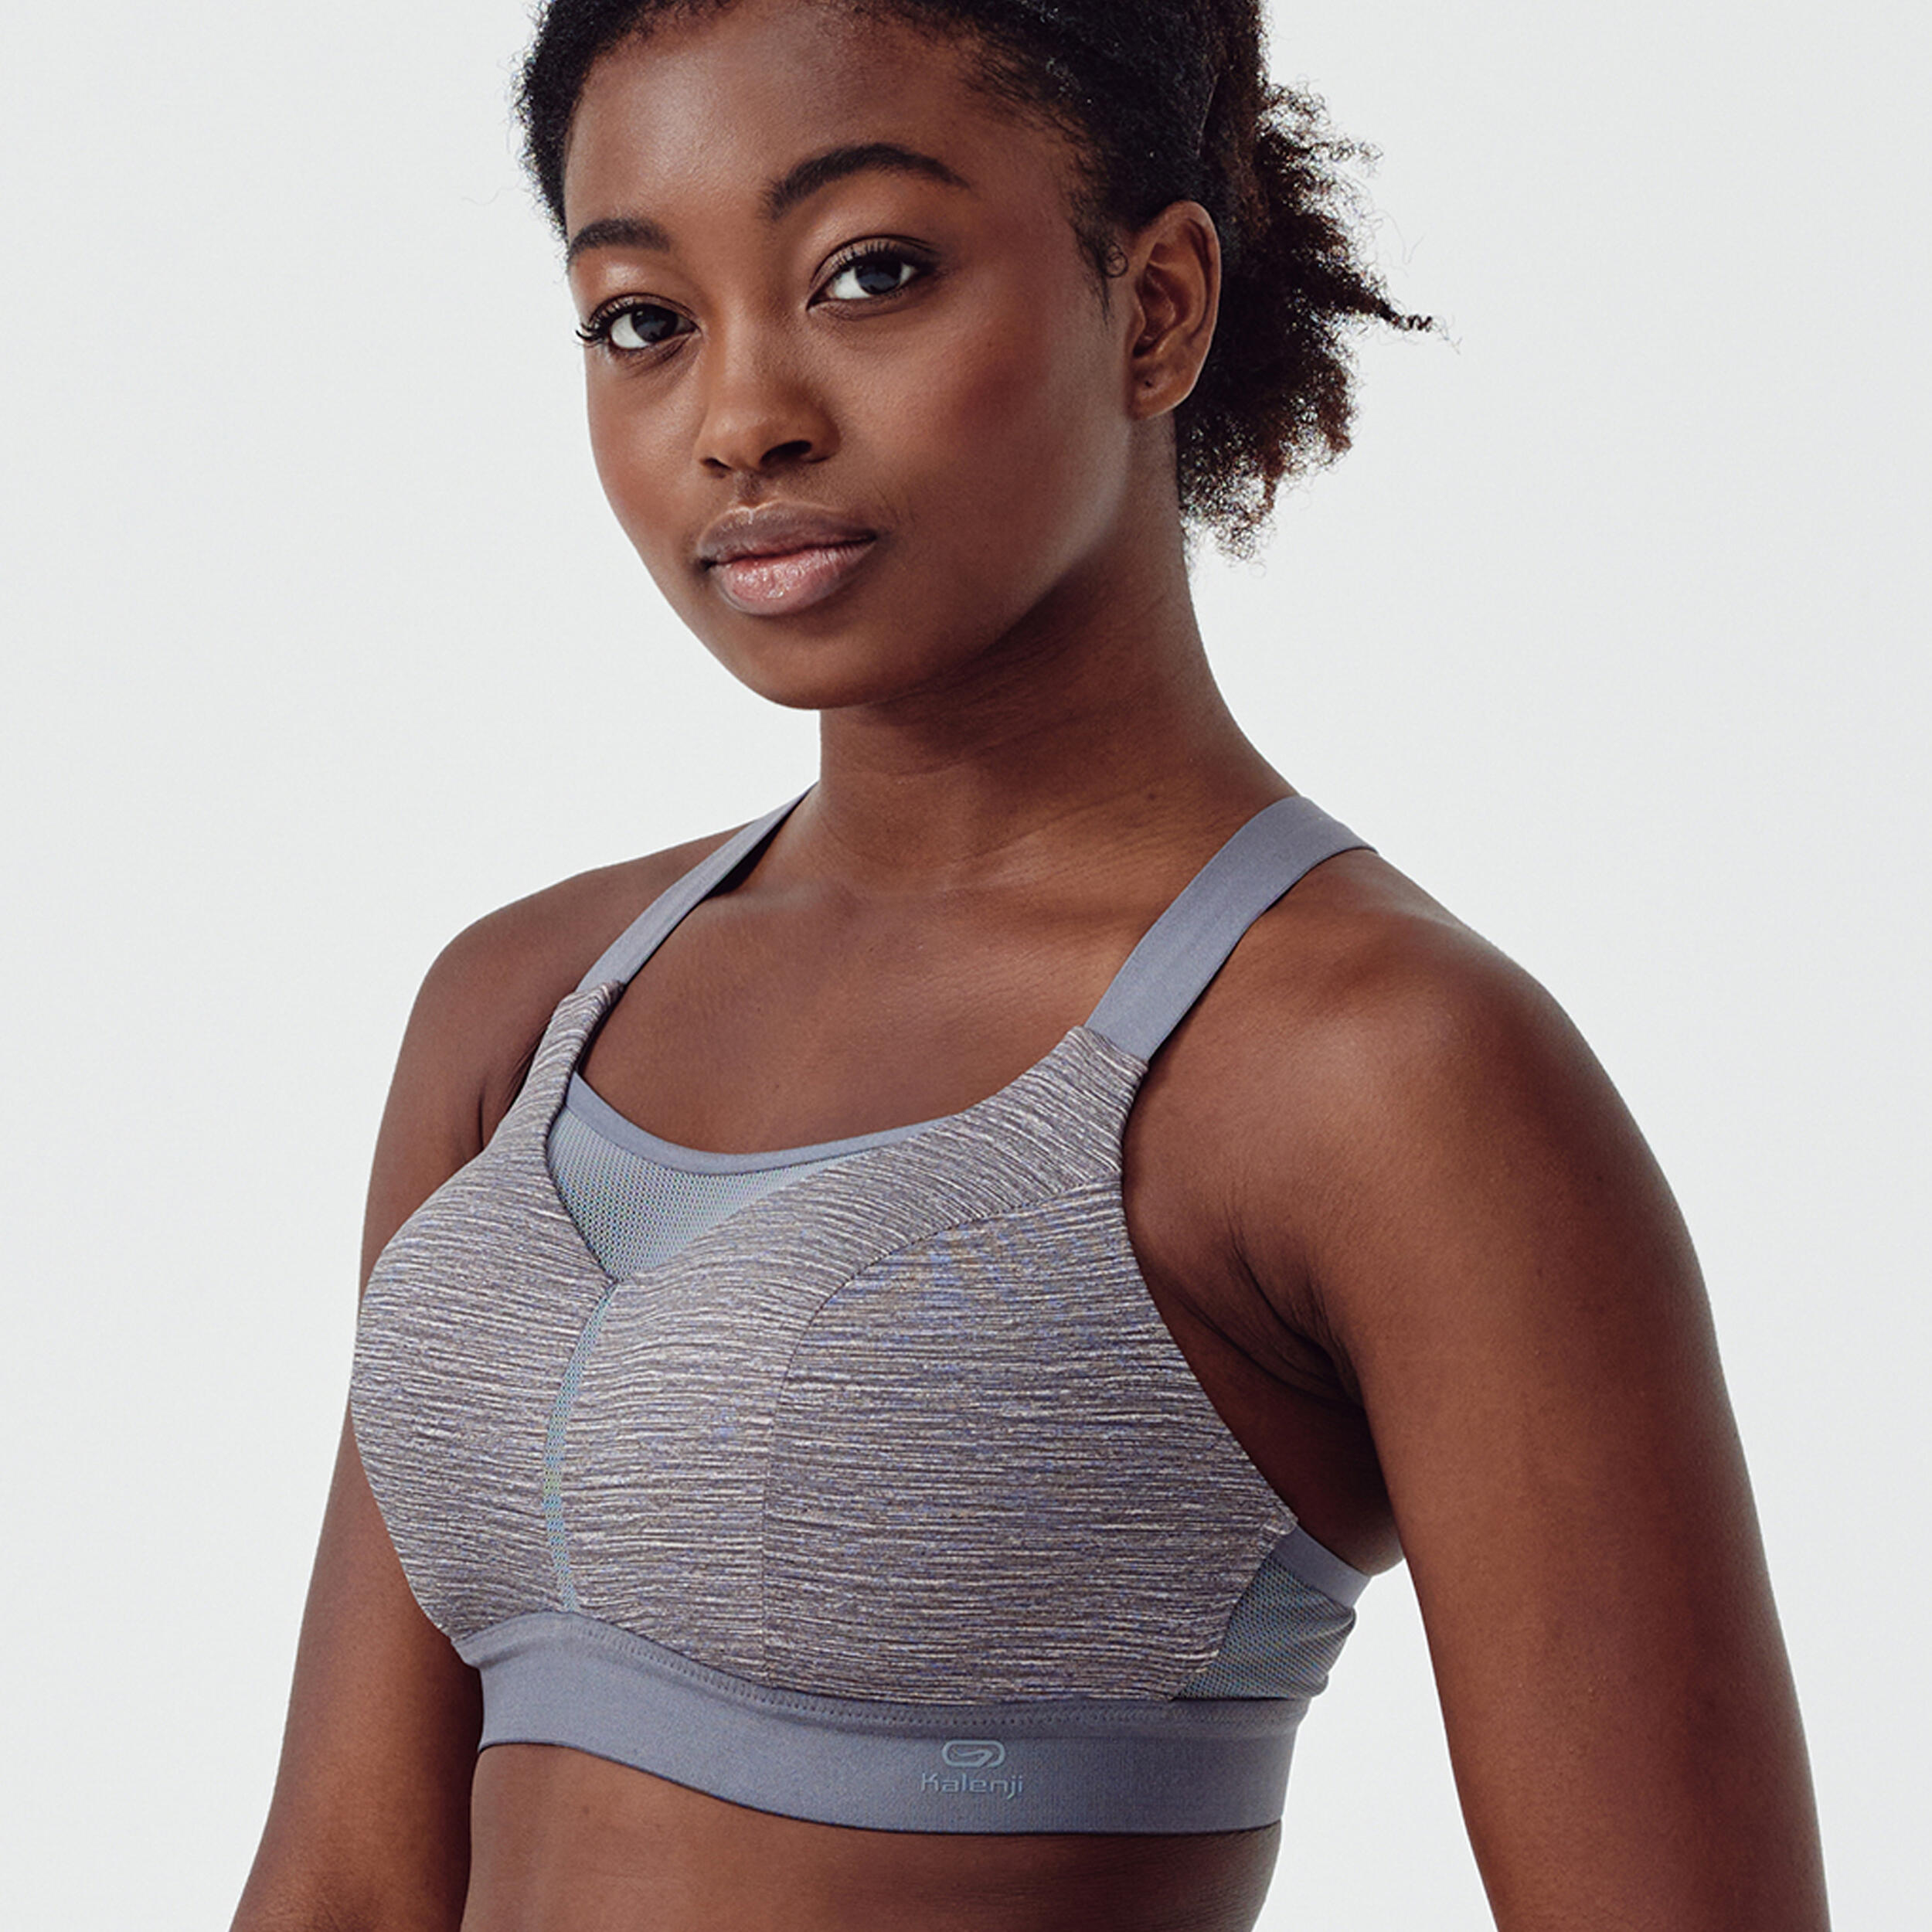 Domyos By Decathlon Navy Blue Solid Heavily Padded High-Support Workout Bra  Price in India, Full Specifications & Offers